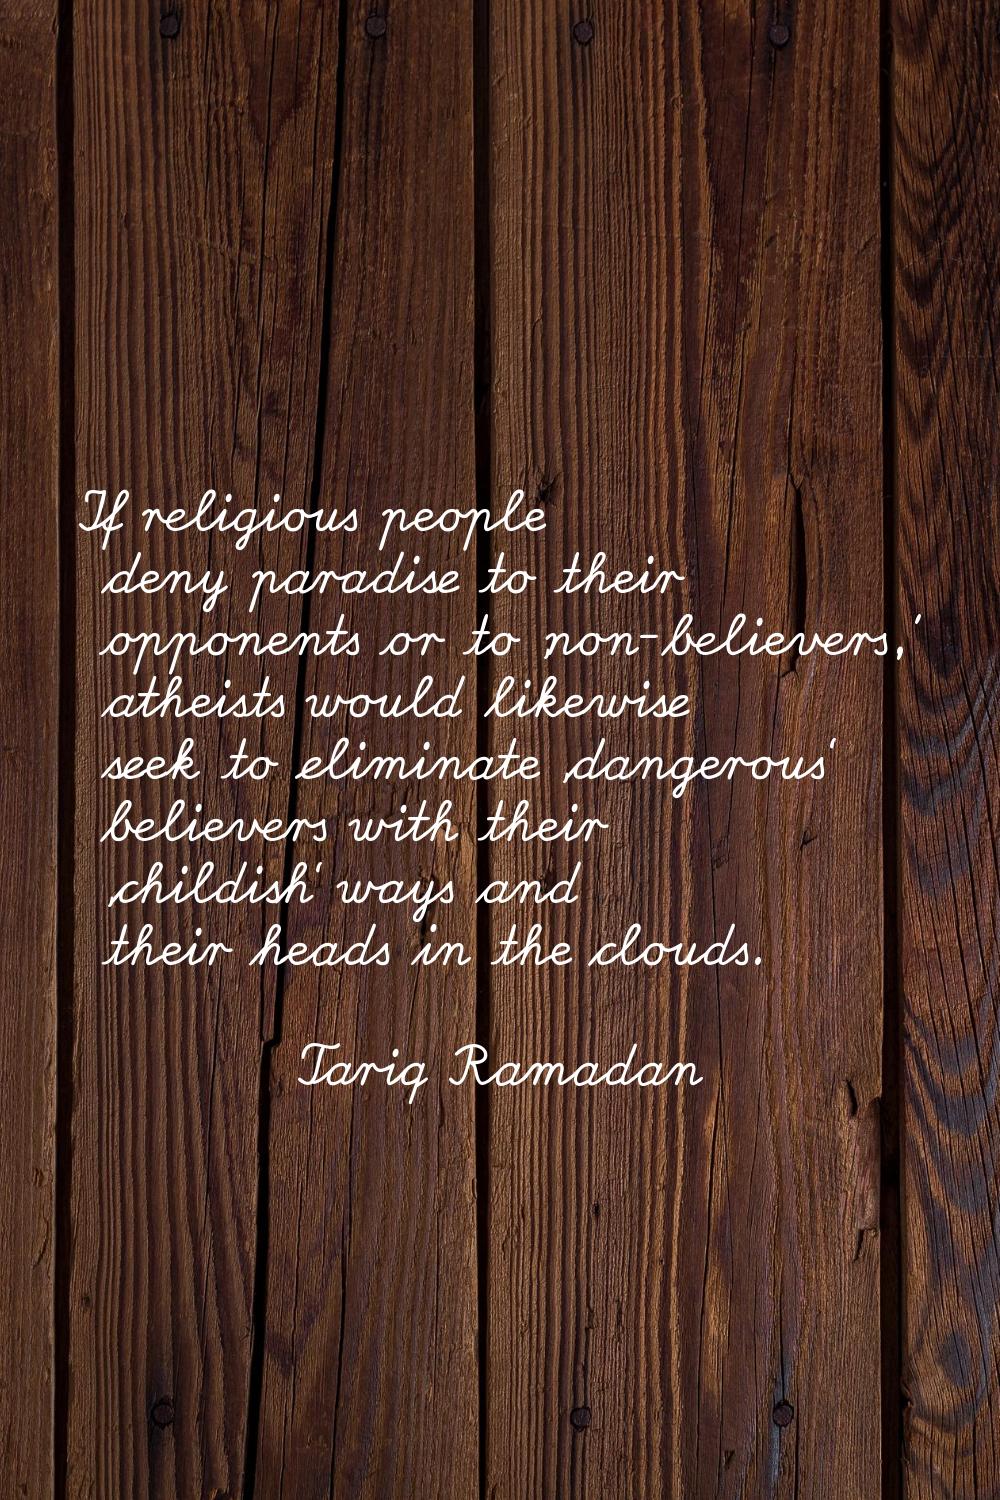 If religious people deny paradise to their opponents or to 'non-believers,' atheists would likewise